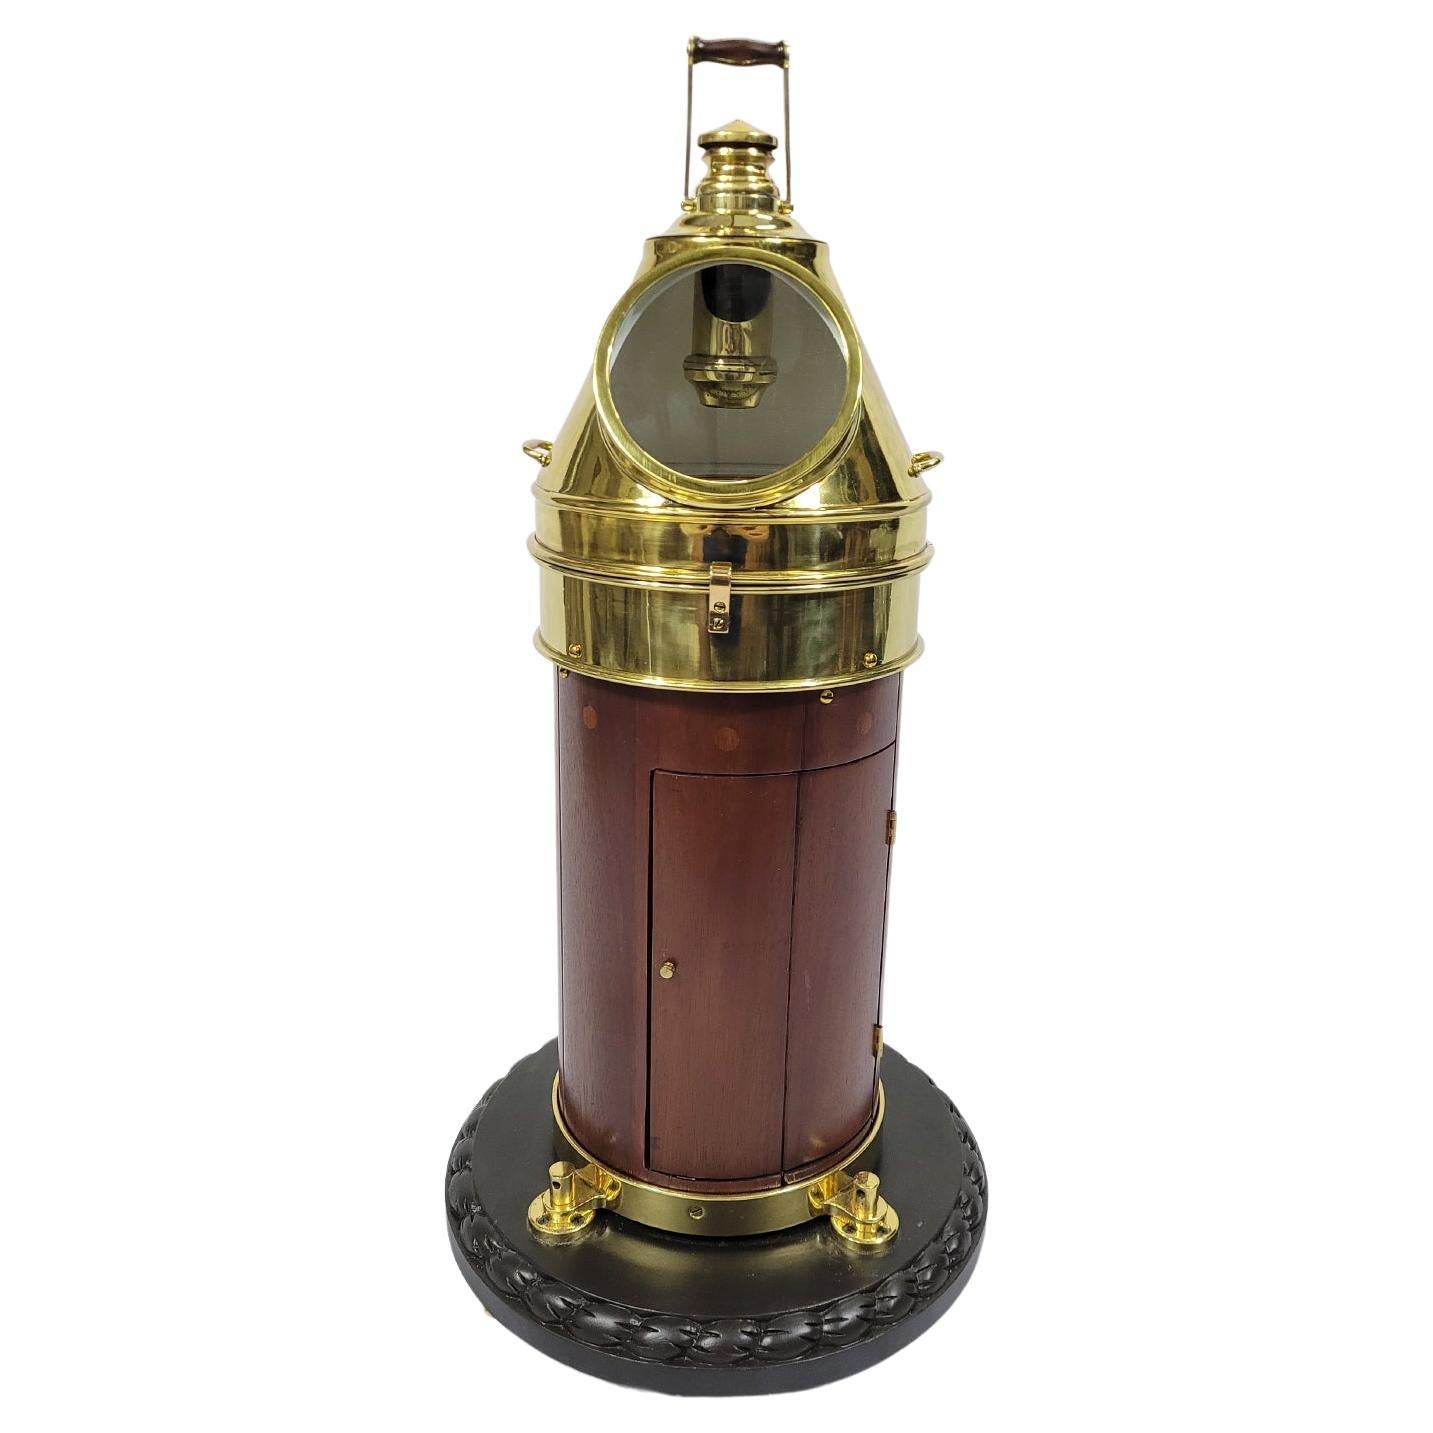 Brass and Wood Yacht Binnacle Compass For Sale